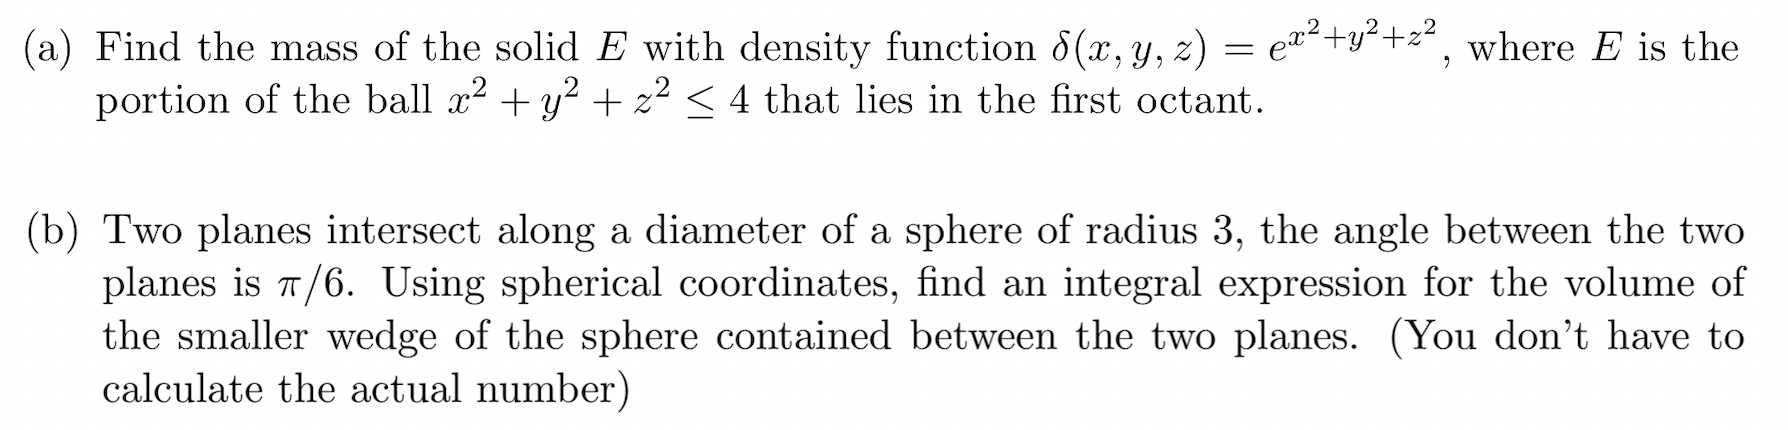 (a) Find the mass of the solid E with density function 8(x, y, z) = e¤²+y<+z², where E is the
portion of the ball x? + y? + z² < 4 that lies in the first octant.
